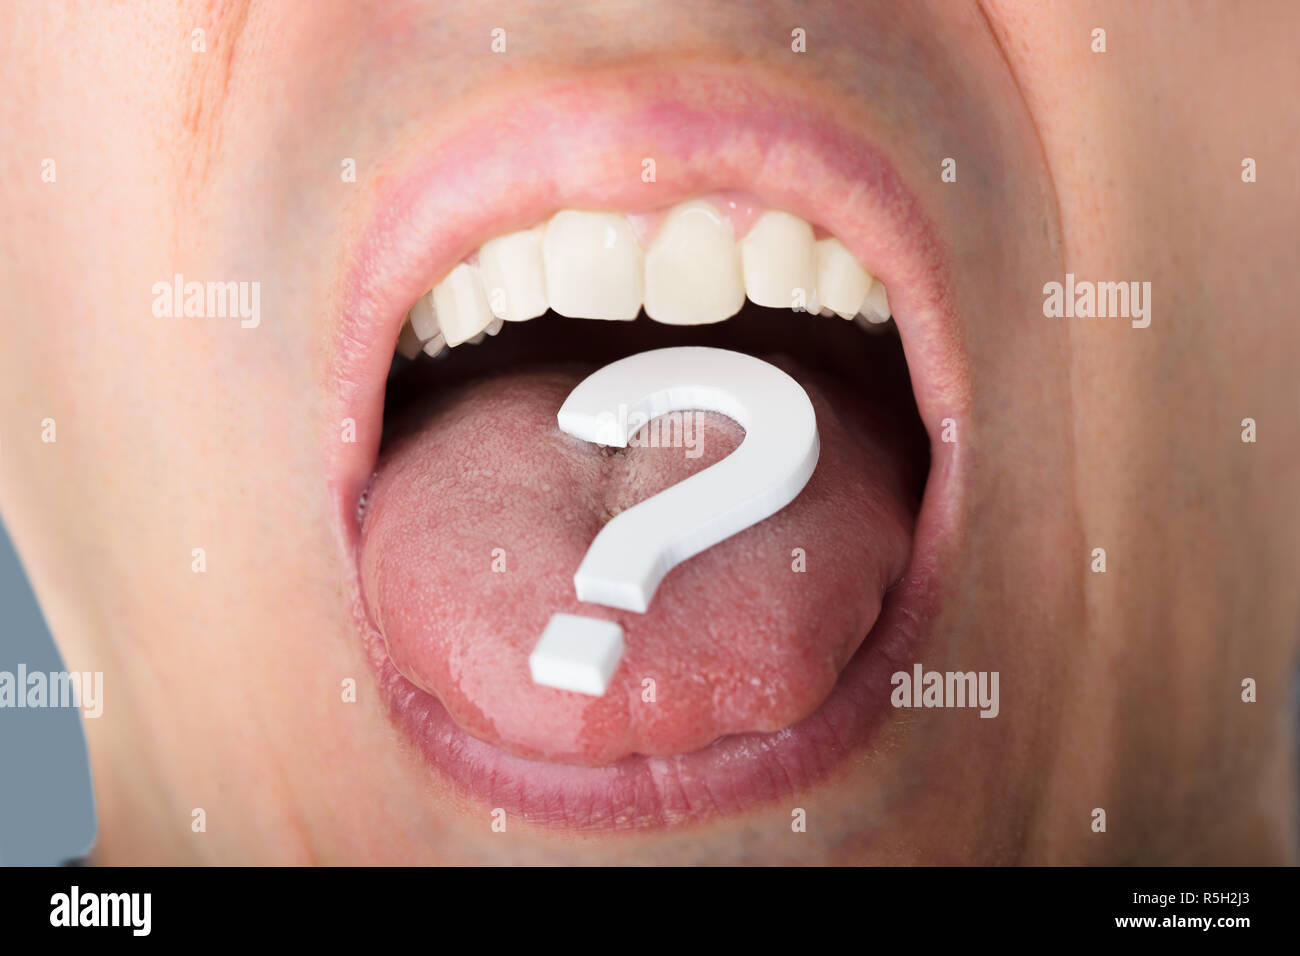 Question Mark On Man's Tongue Stock Photo